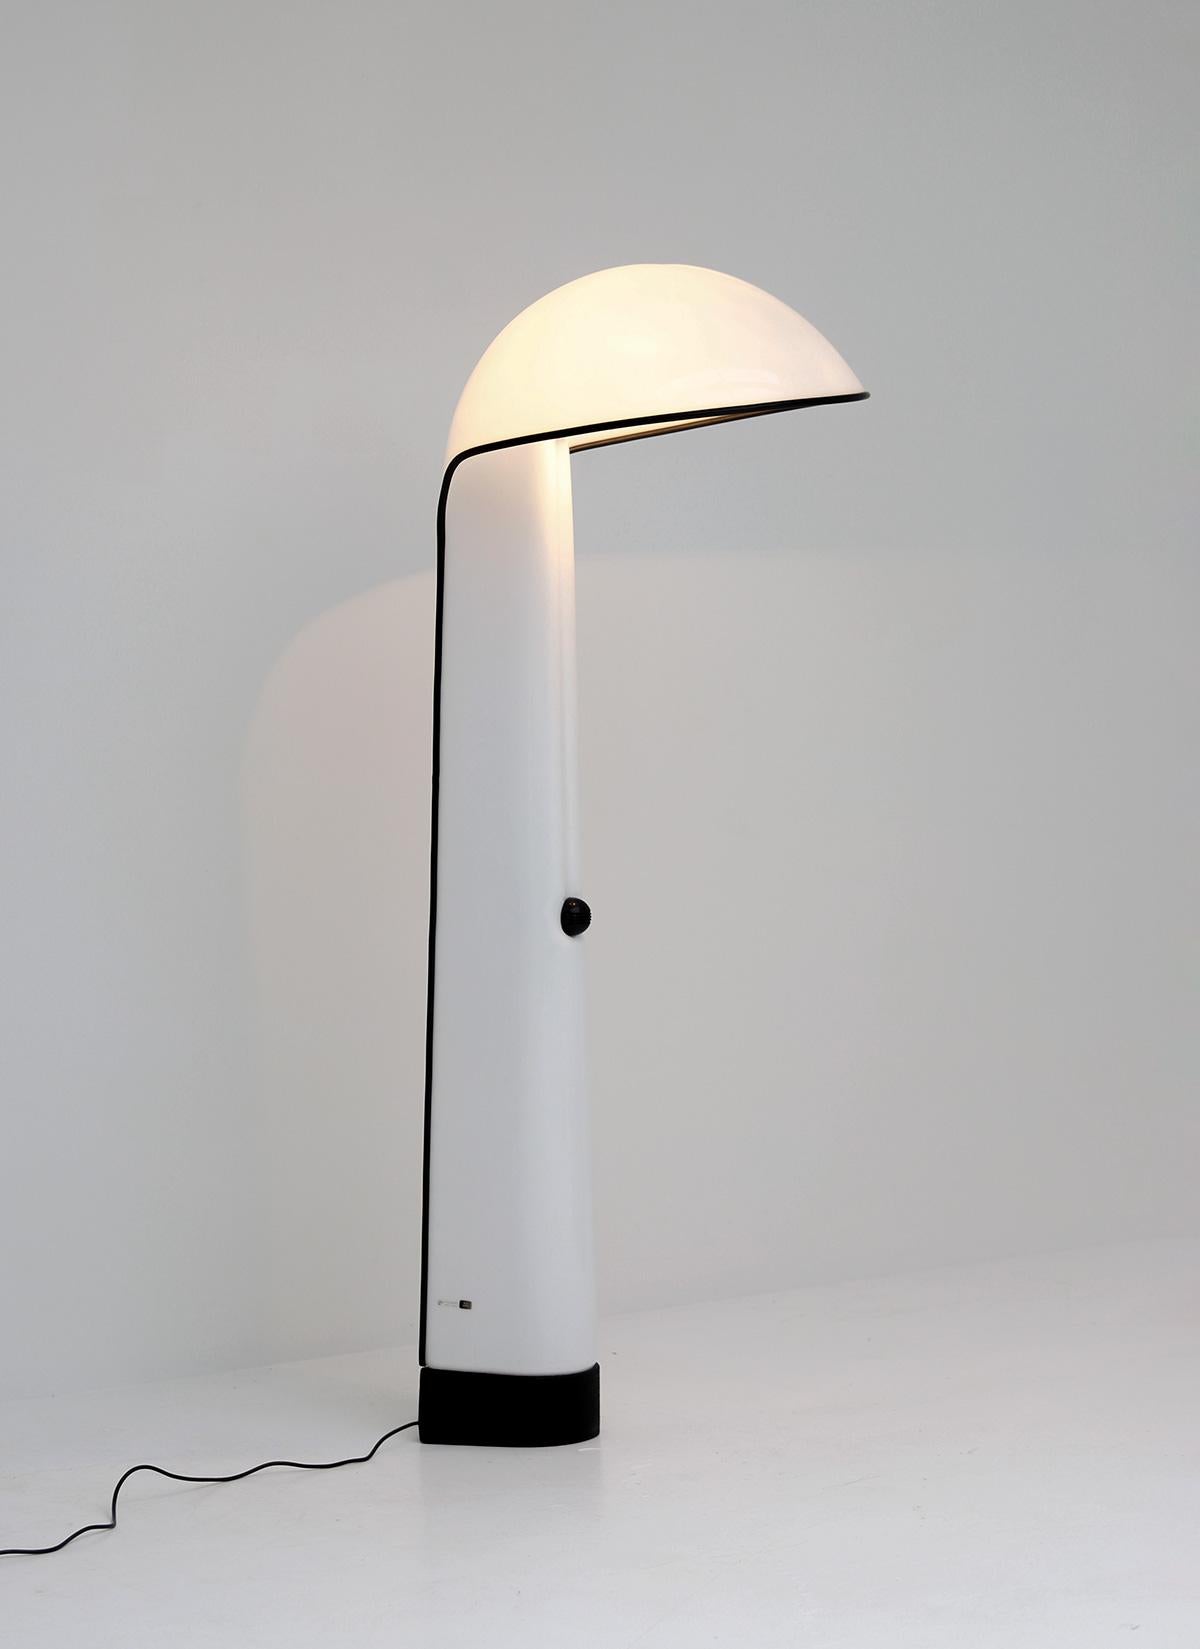 Alba floor lamp designed by Sergio Brazzoli and Ermanno Lampa in 1973 for Harvey Guzzini. It has a white plastic hood and rests on a heavy cast iron base. A round black witch is attached in the middle. This space age, sculptural lamp attests the